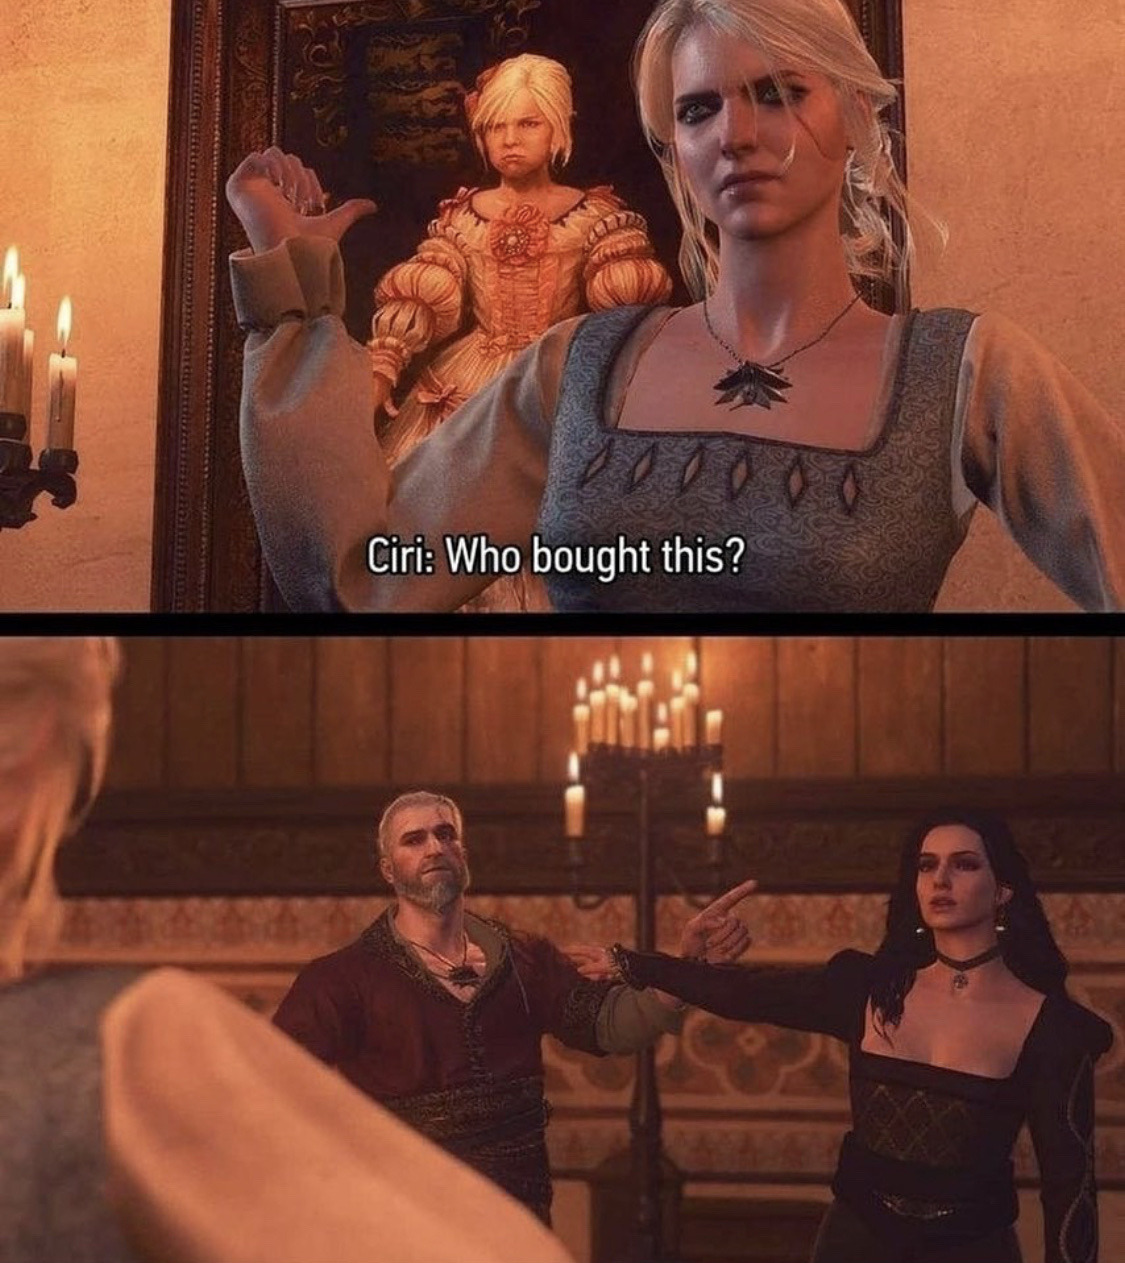 cateringisalie:rentfreecat:witcher-the-last-wish:I know next to nothing about Witcher but this is still objectively hilariousExactly the reason I reblogged it too.